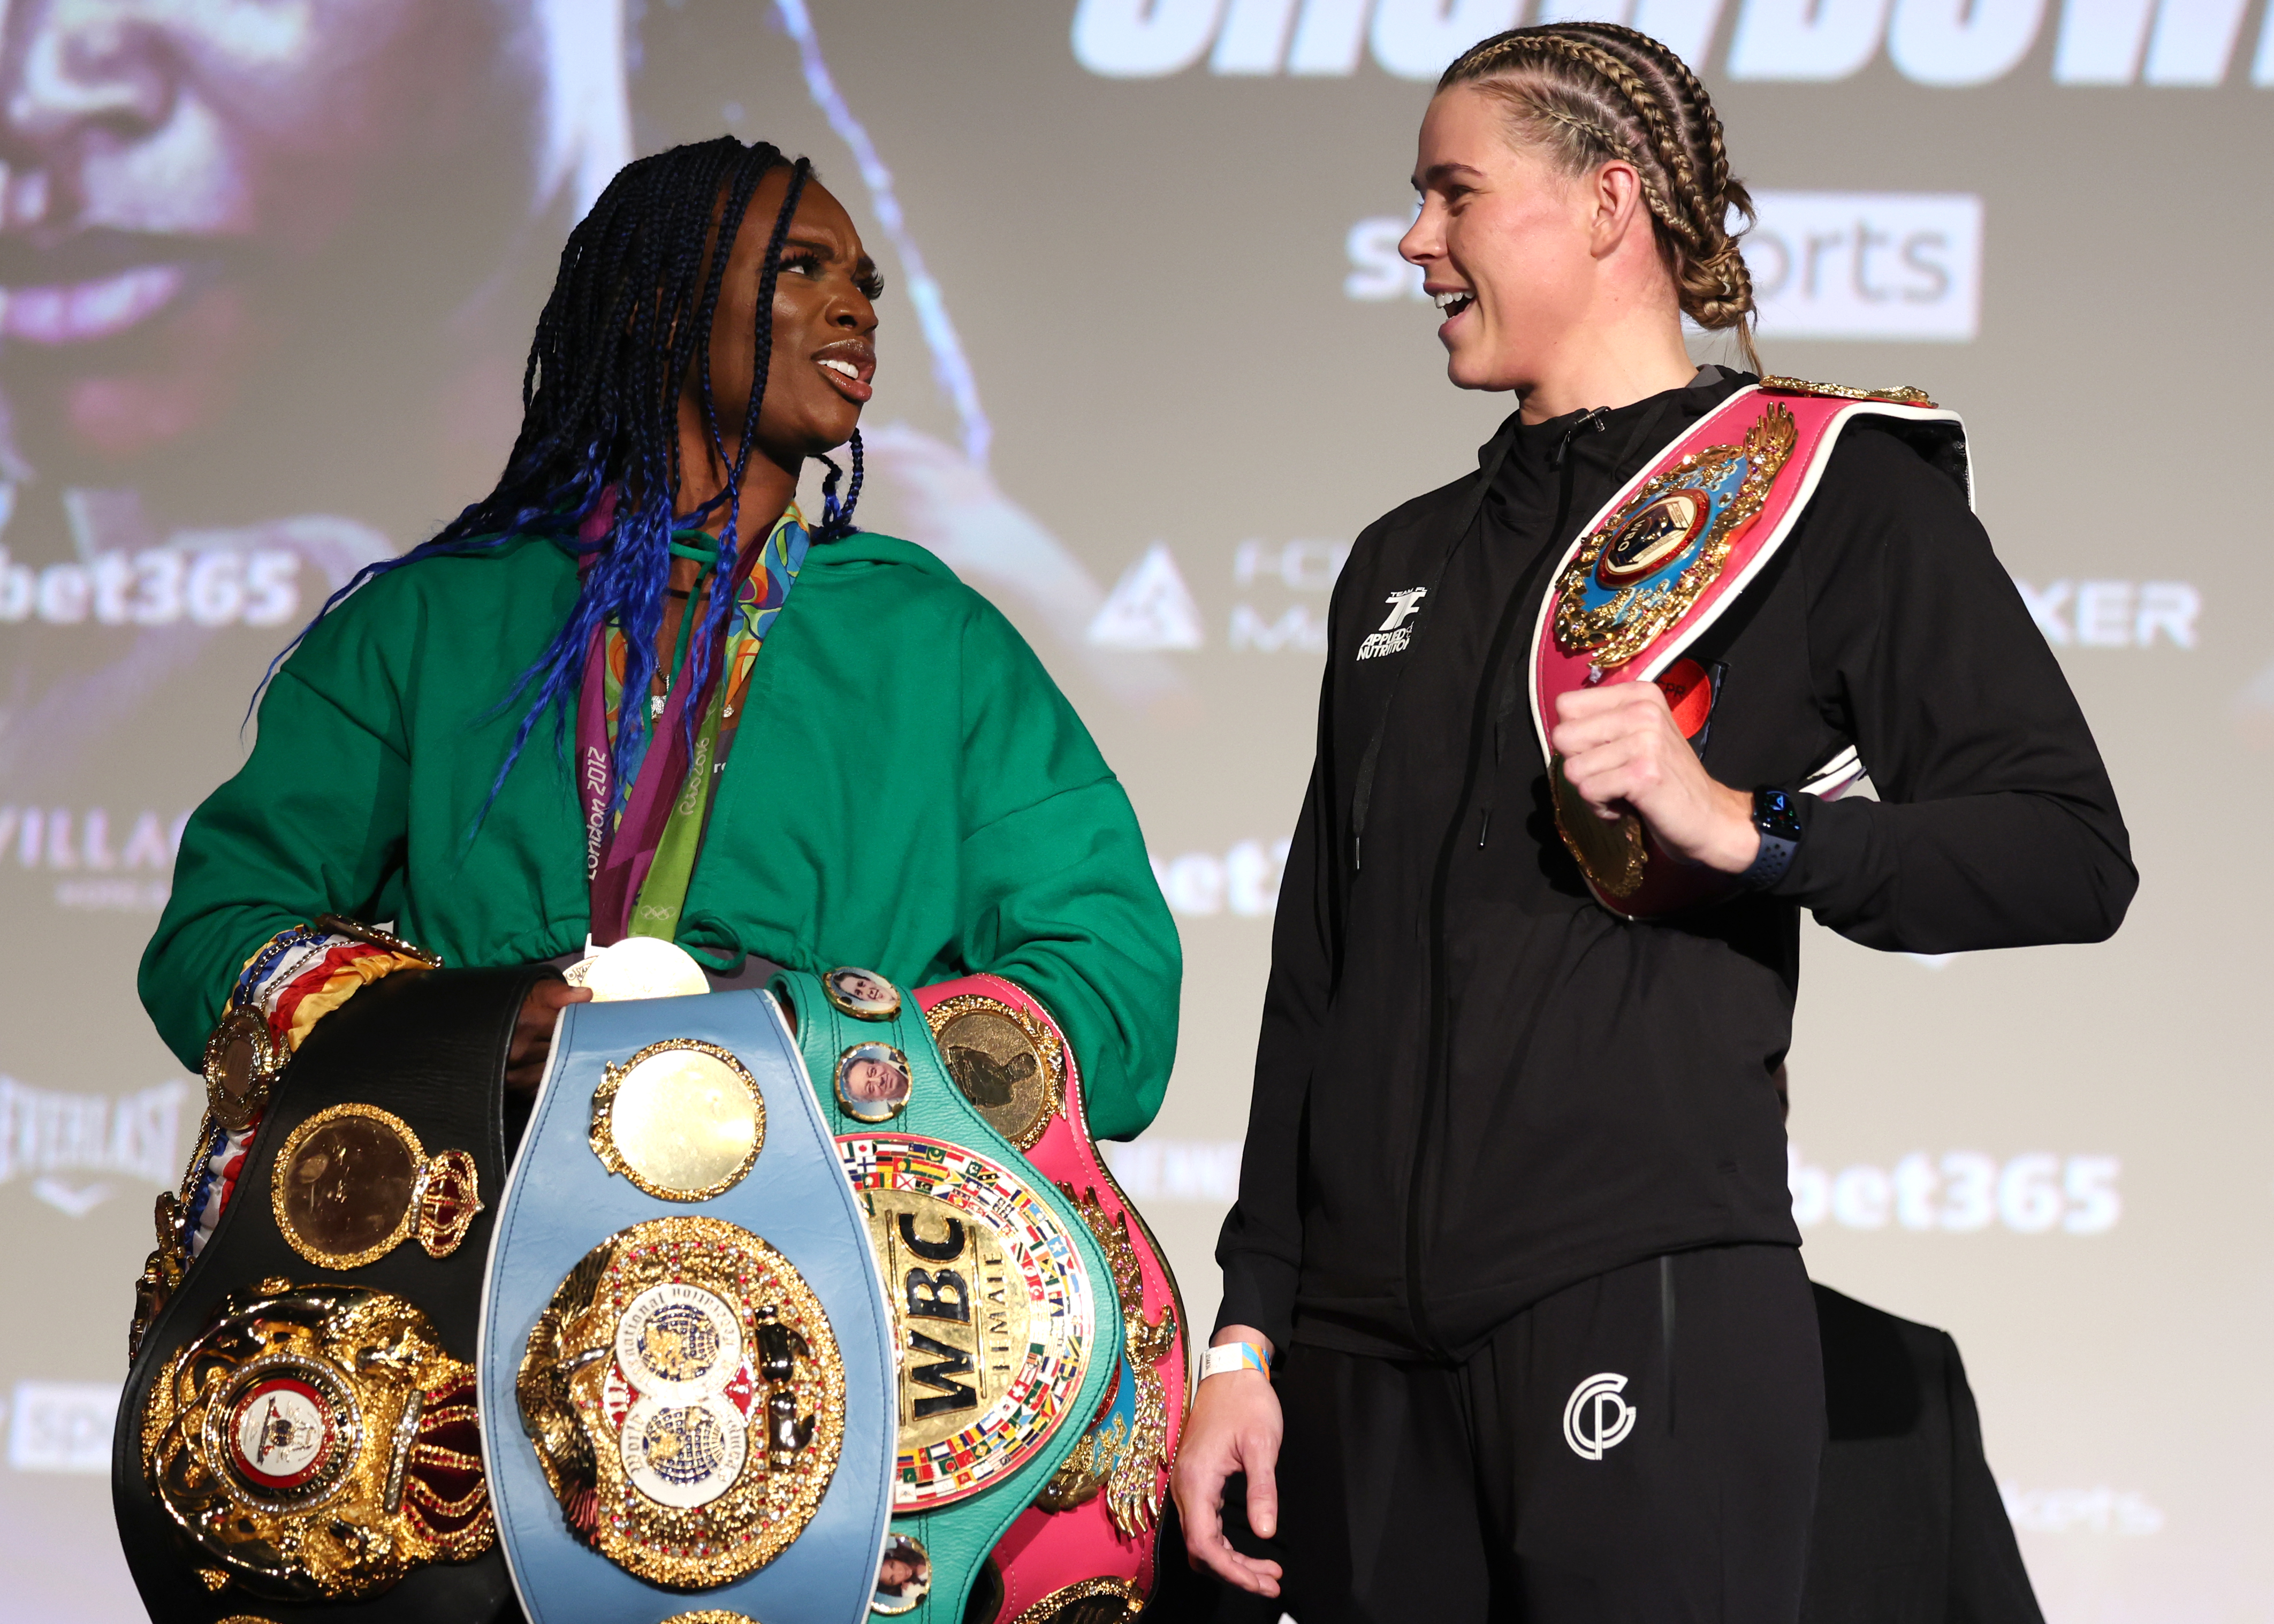 Will Claressa Shields or Savannah Marshall be crowned undisputed middleweight champ on Saturday?